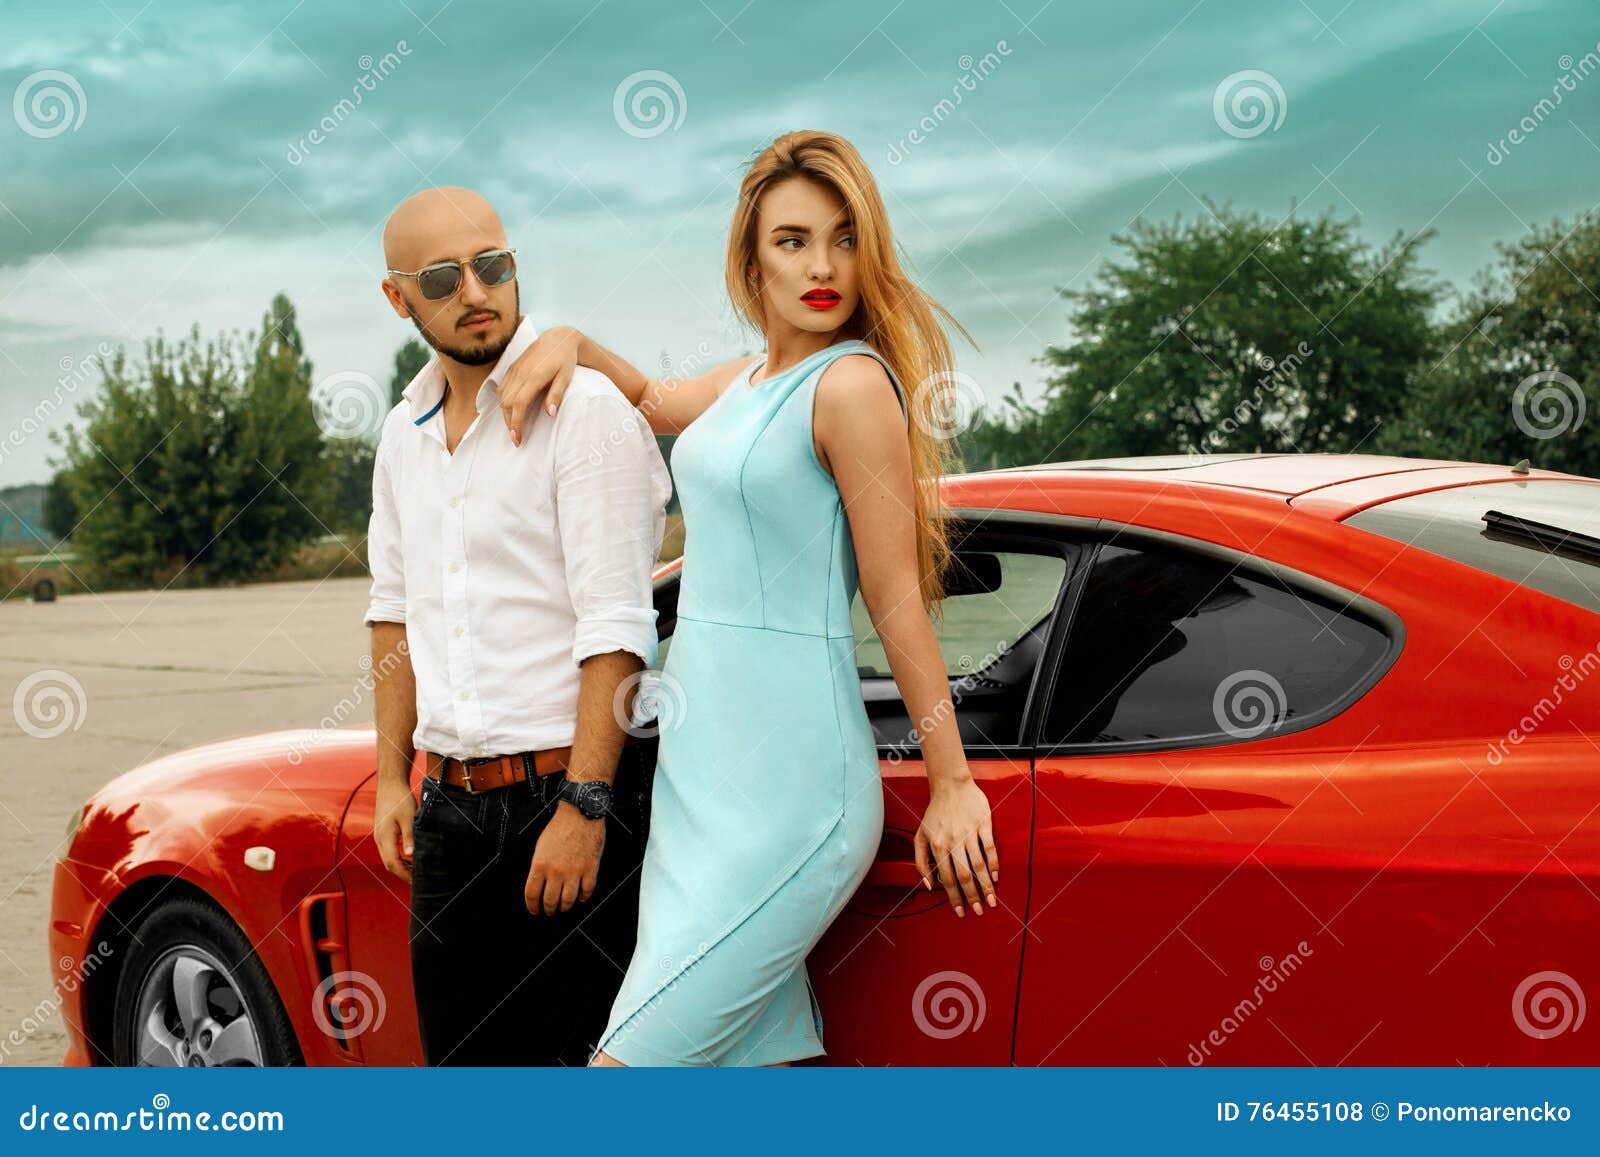 Young Handsome Man Posing Convertible Car Stock Photo 768240010 |  Shutterstock